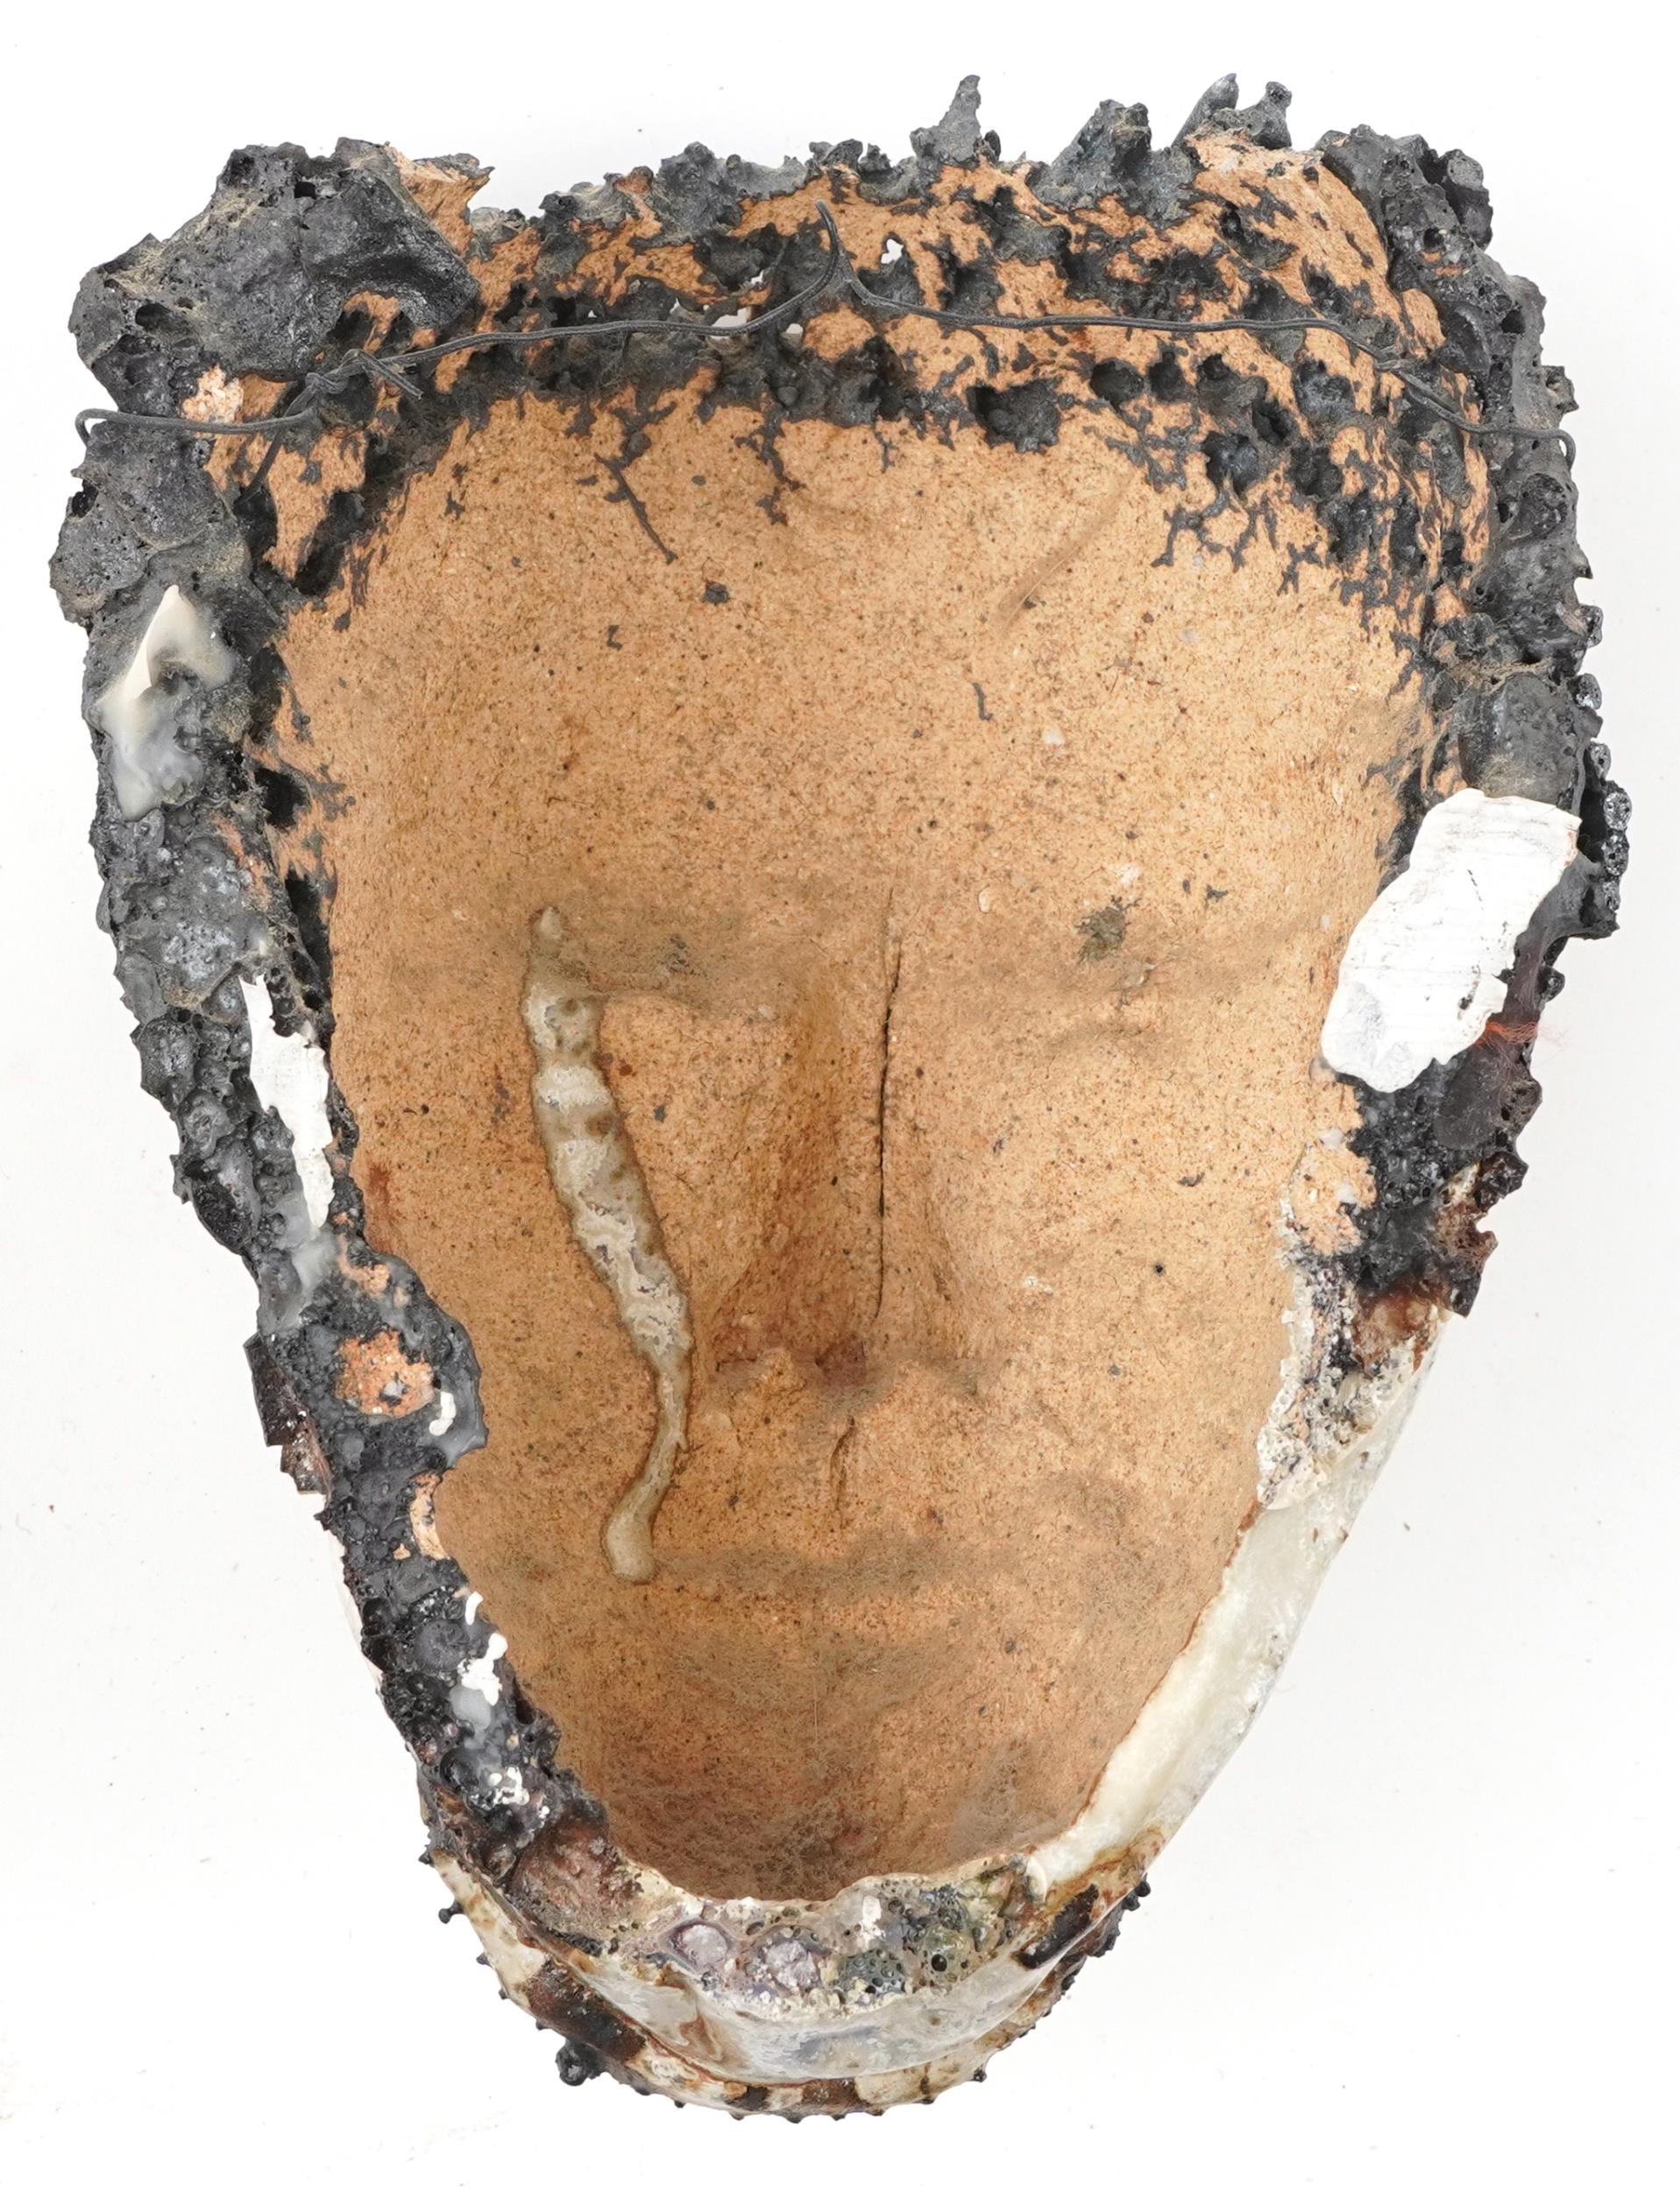 Mid century style grotesque pottery face mask, 19cm high - Image 2 of 2